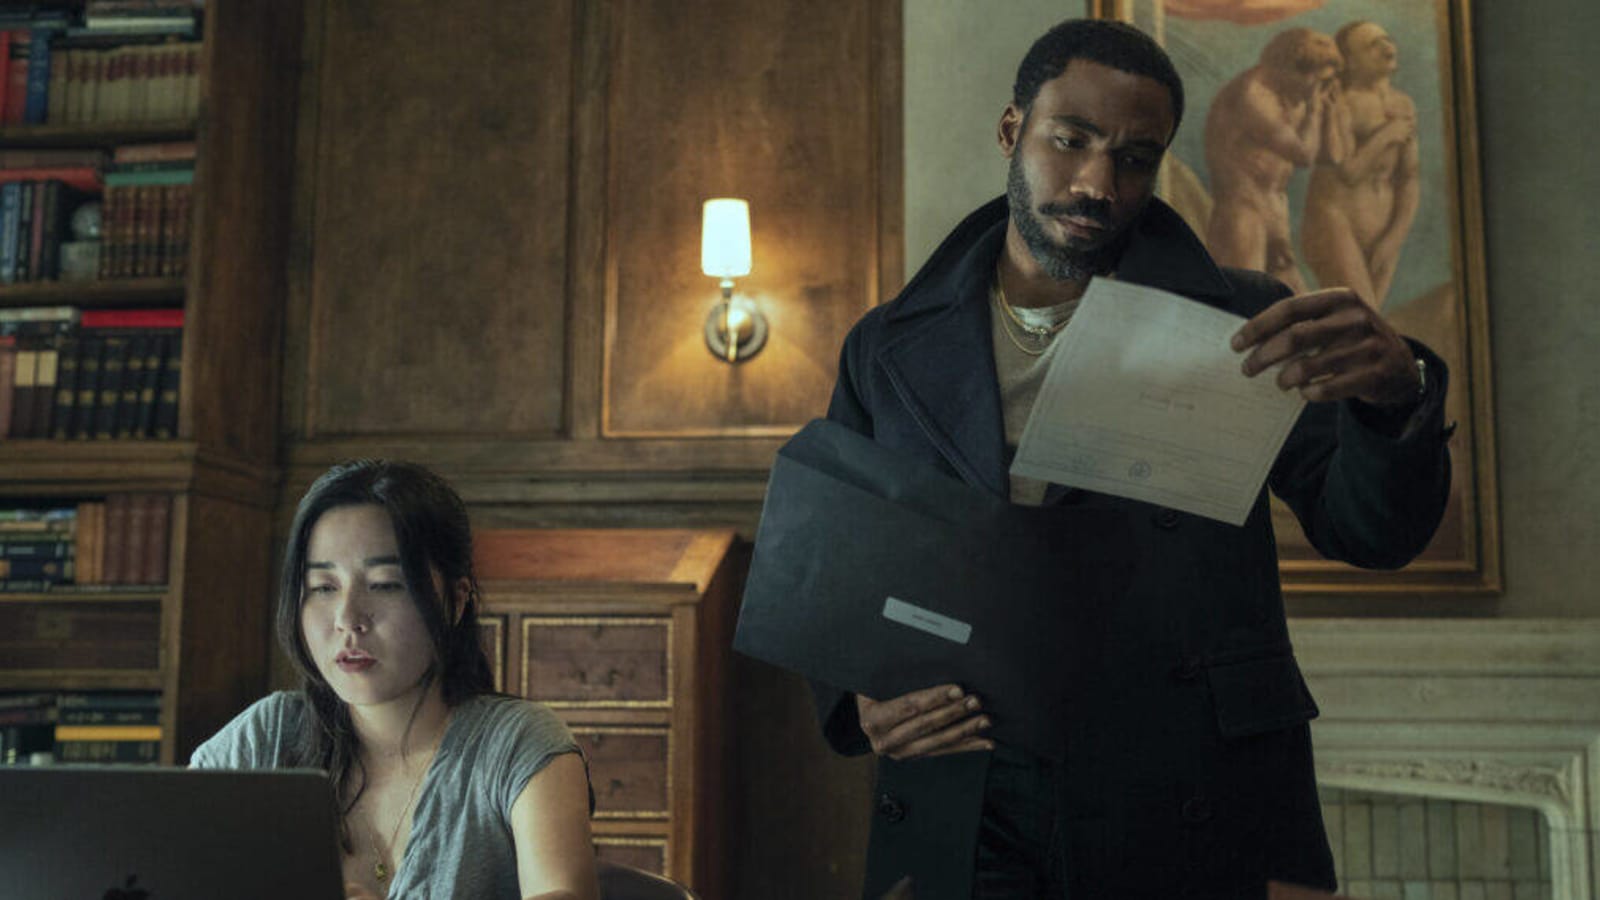 ‘Mr. & Mrs. Smith’ Trailer Spies, Lies & Romance for Donald Glover